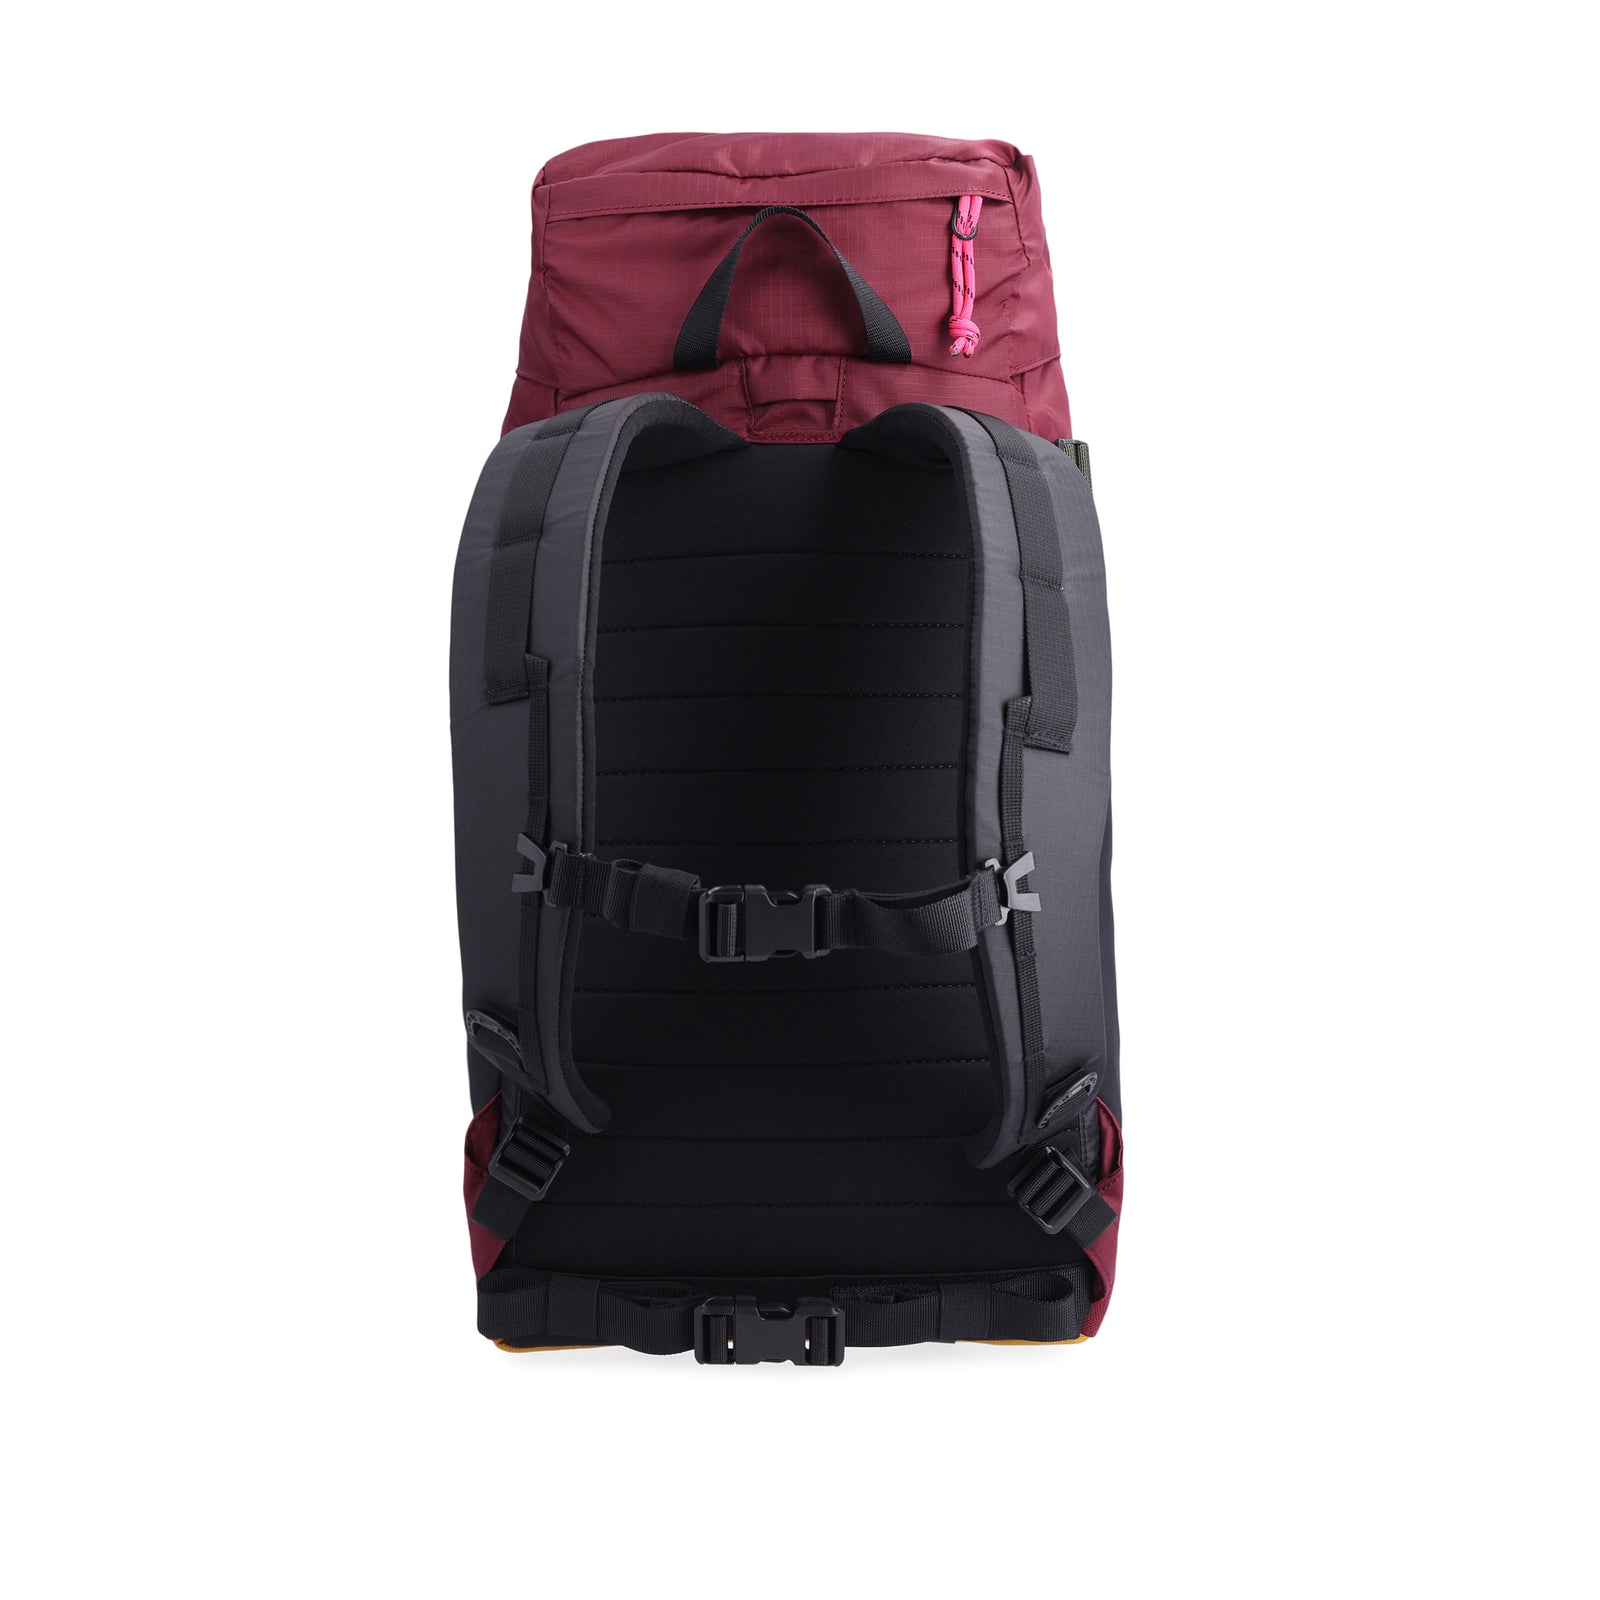 Shot of padded backpack straps and sternum strap on back of Topo Designs Mountain Pack 16L hiking backpack with internal laptop sleeve in lightweight recycled nylon in "Burgundy / Dark Khaki".